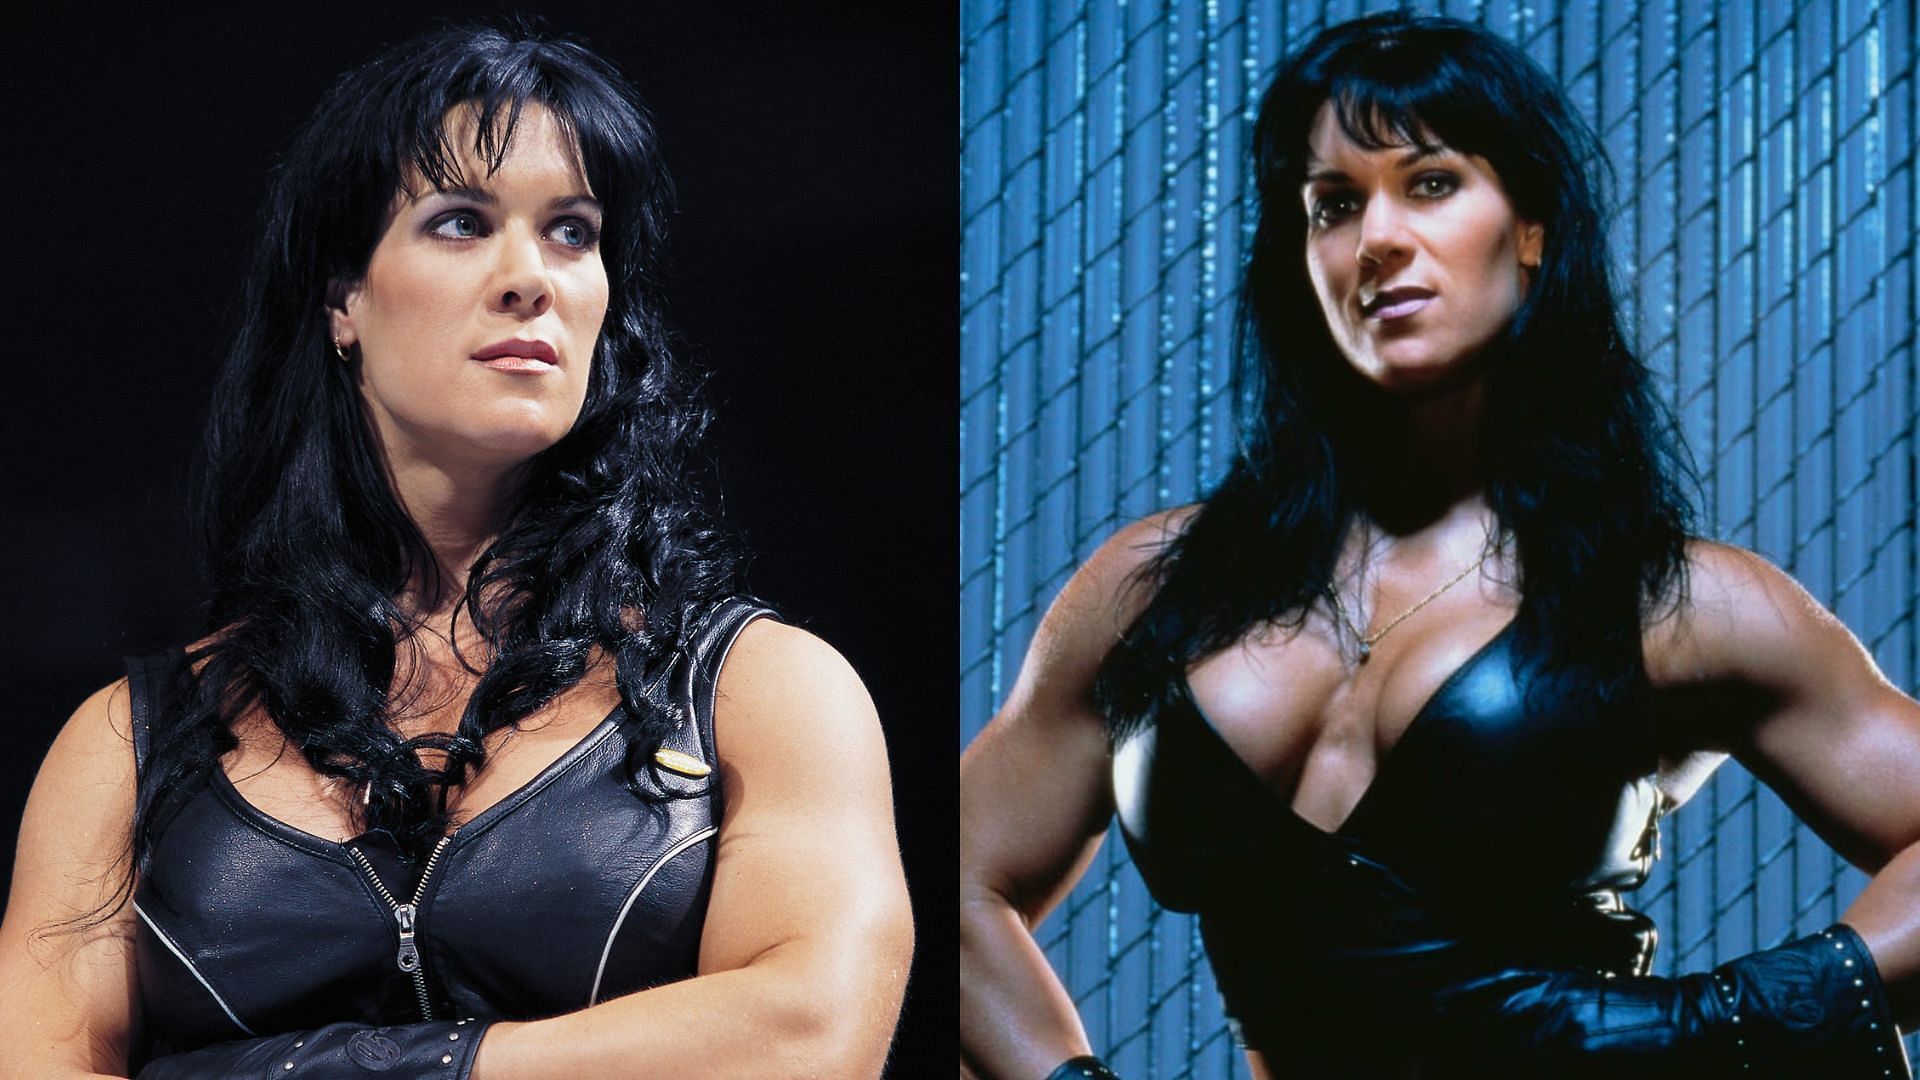 Chyna is a legend of the wrestling business.